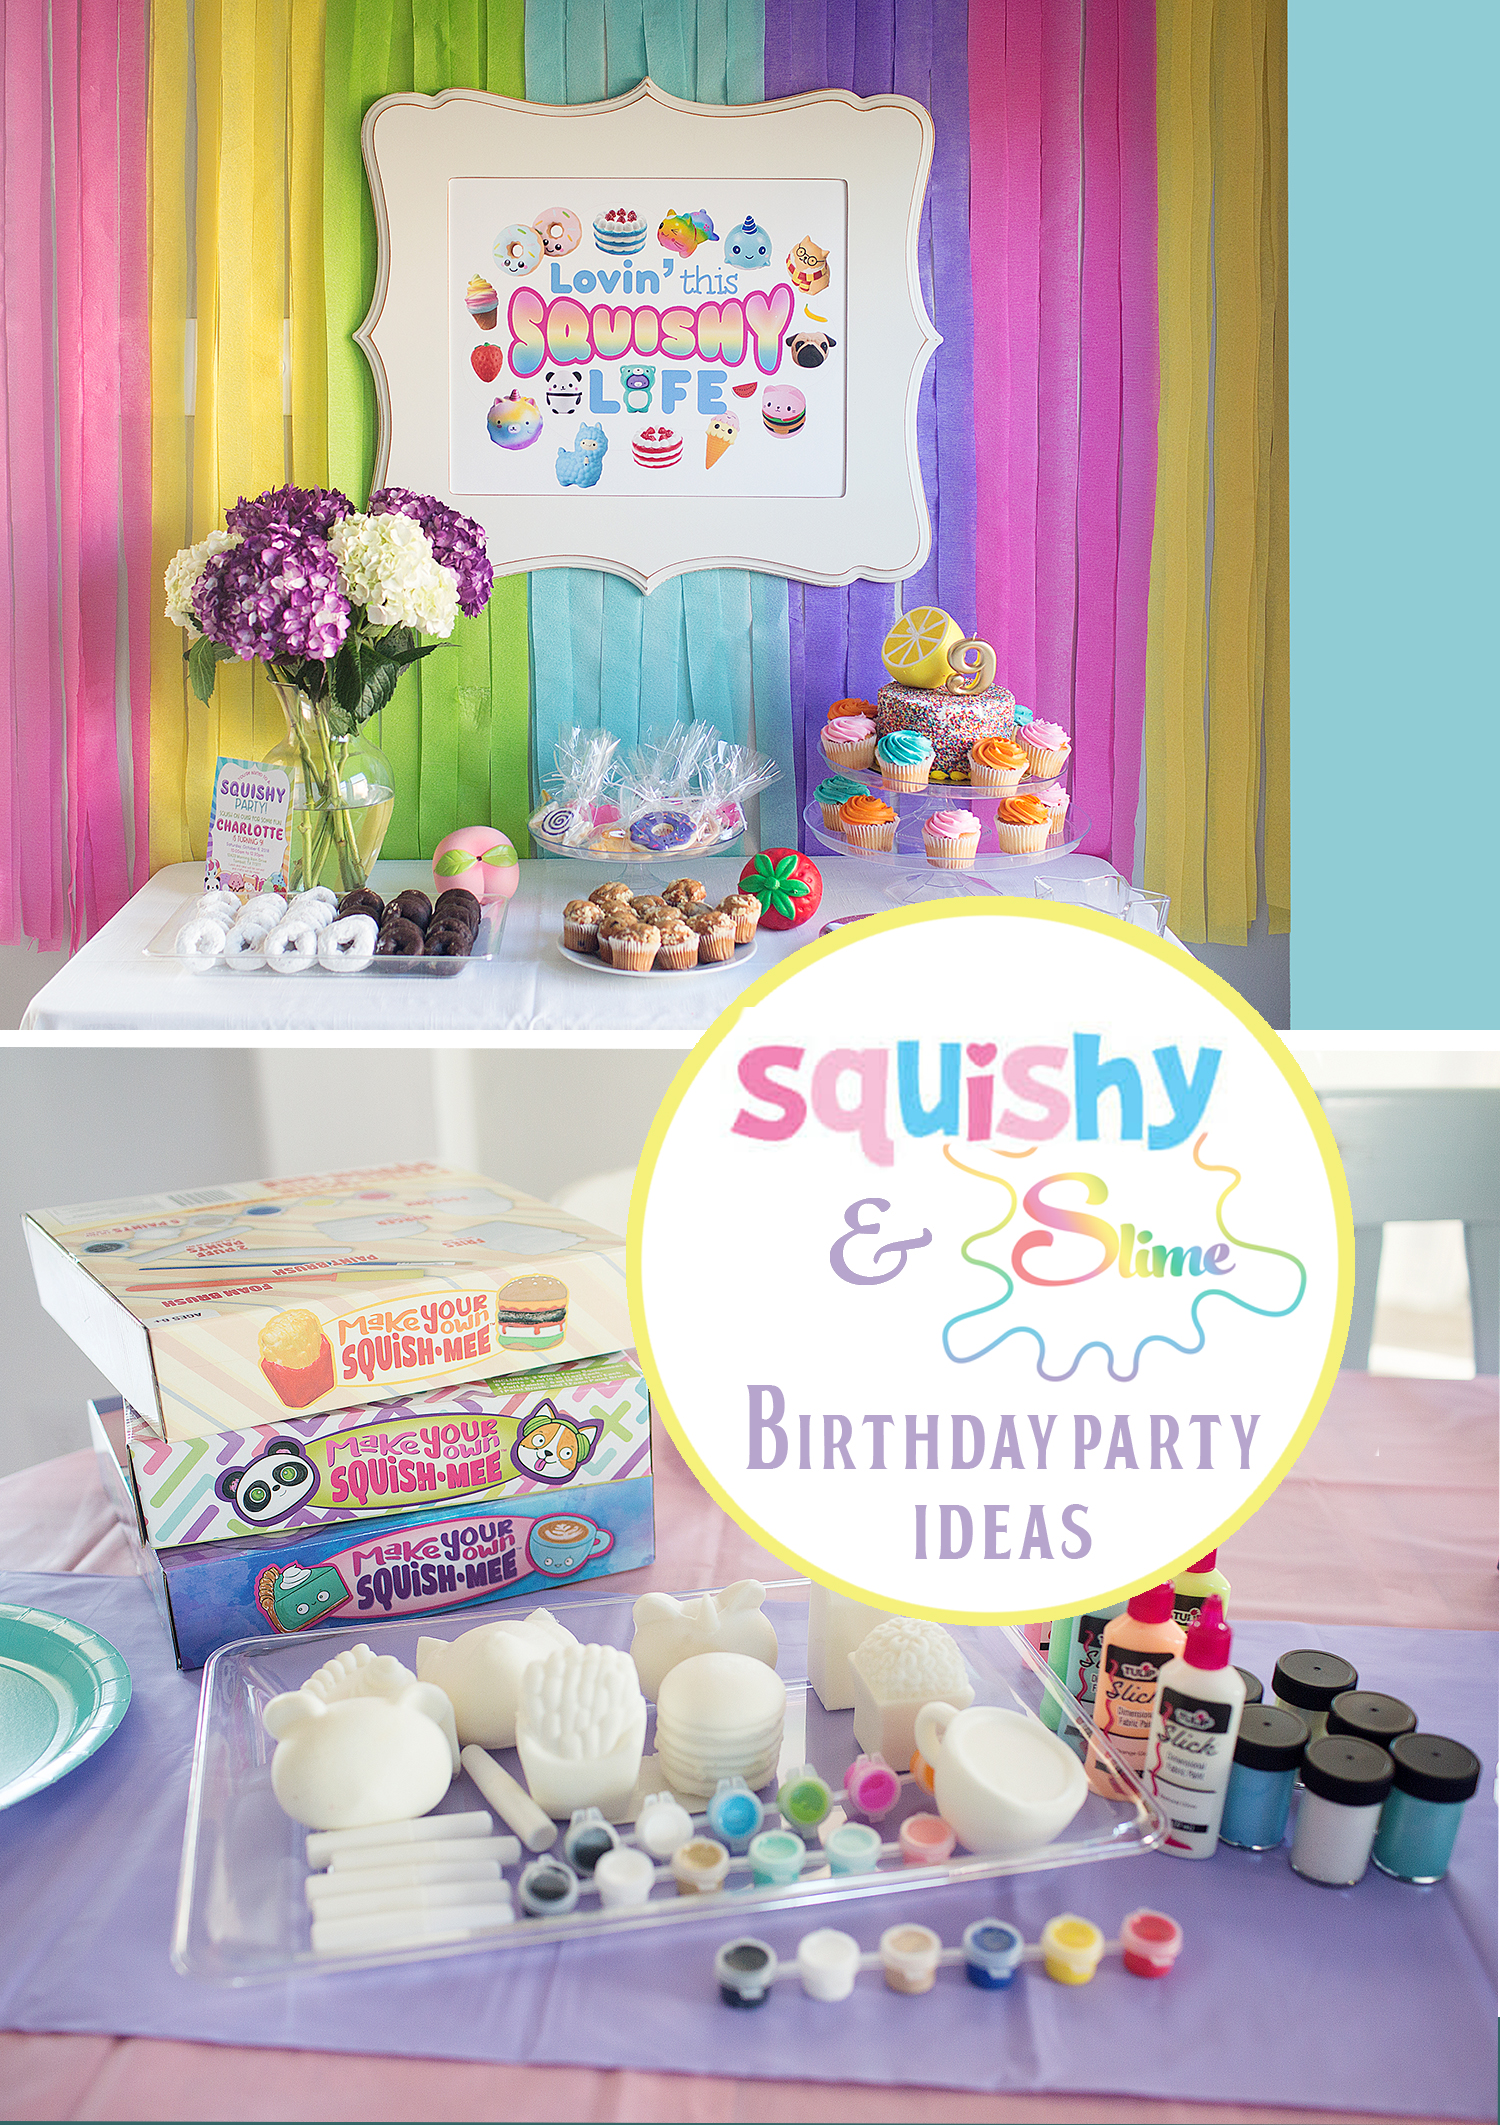 Slime Party Ideas for a Girl Birthday